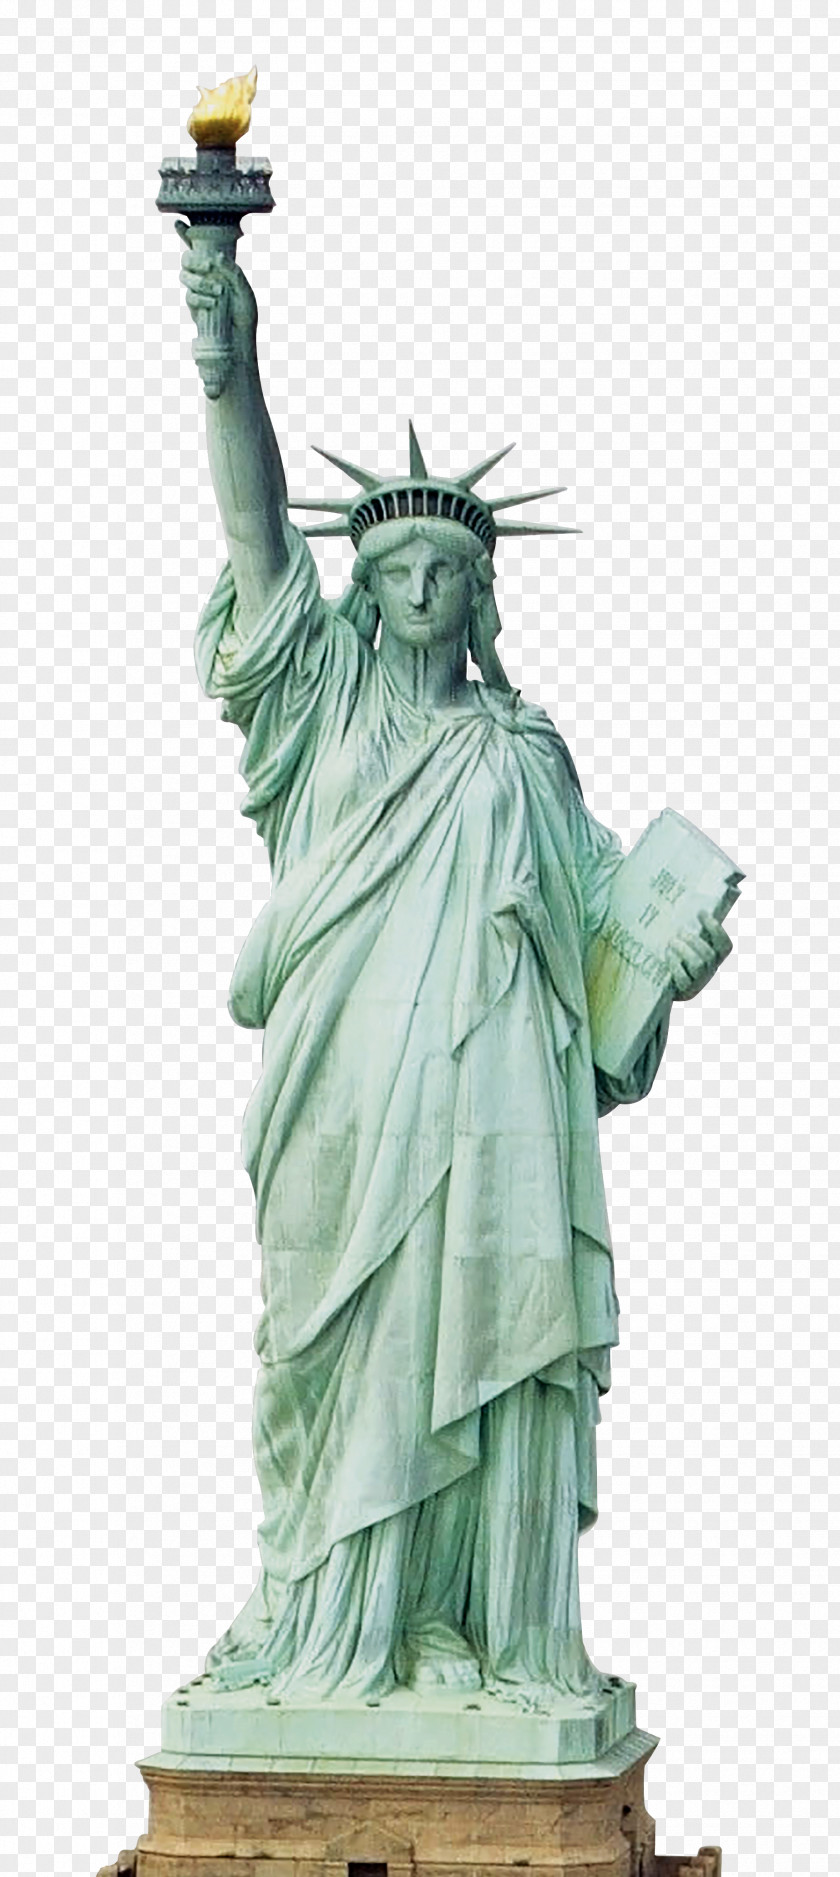 Statue Of Liberty Transparent Background New York Harbor Staten Island Ferry Colossus Rhodes The PNG